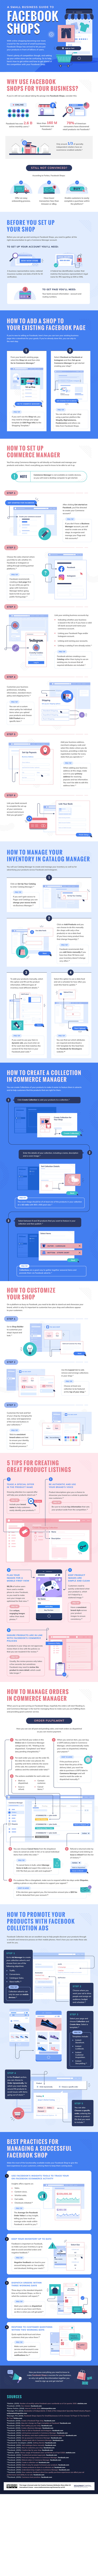 Infographic: How to Get Started Selling on Facebook Shops